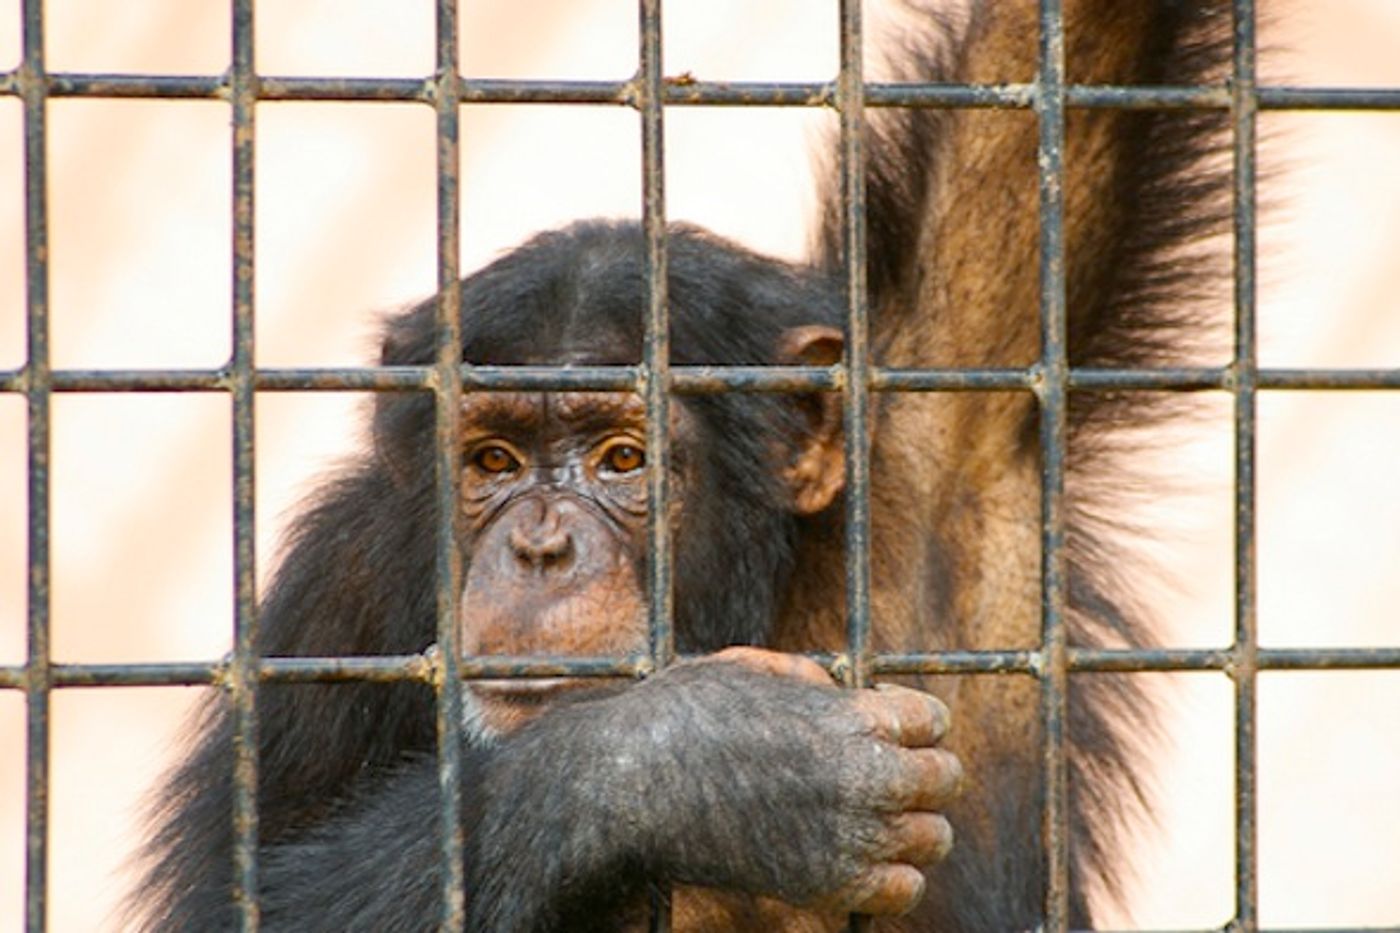 220 lab chimps will be moved to a sanctuary to live out the rest of their lives in freedom.